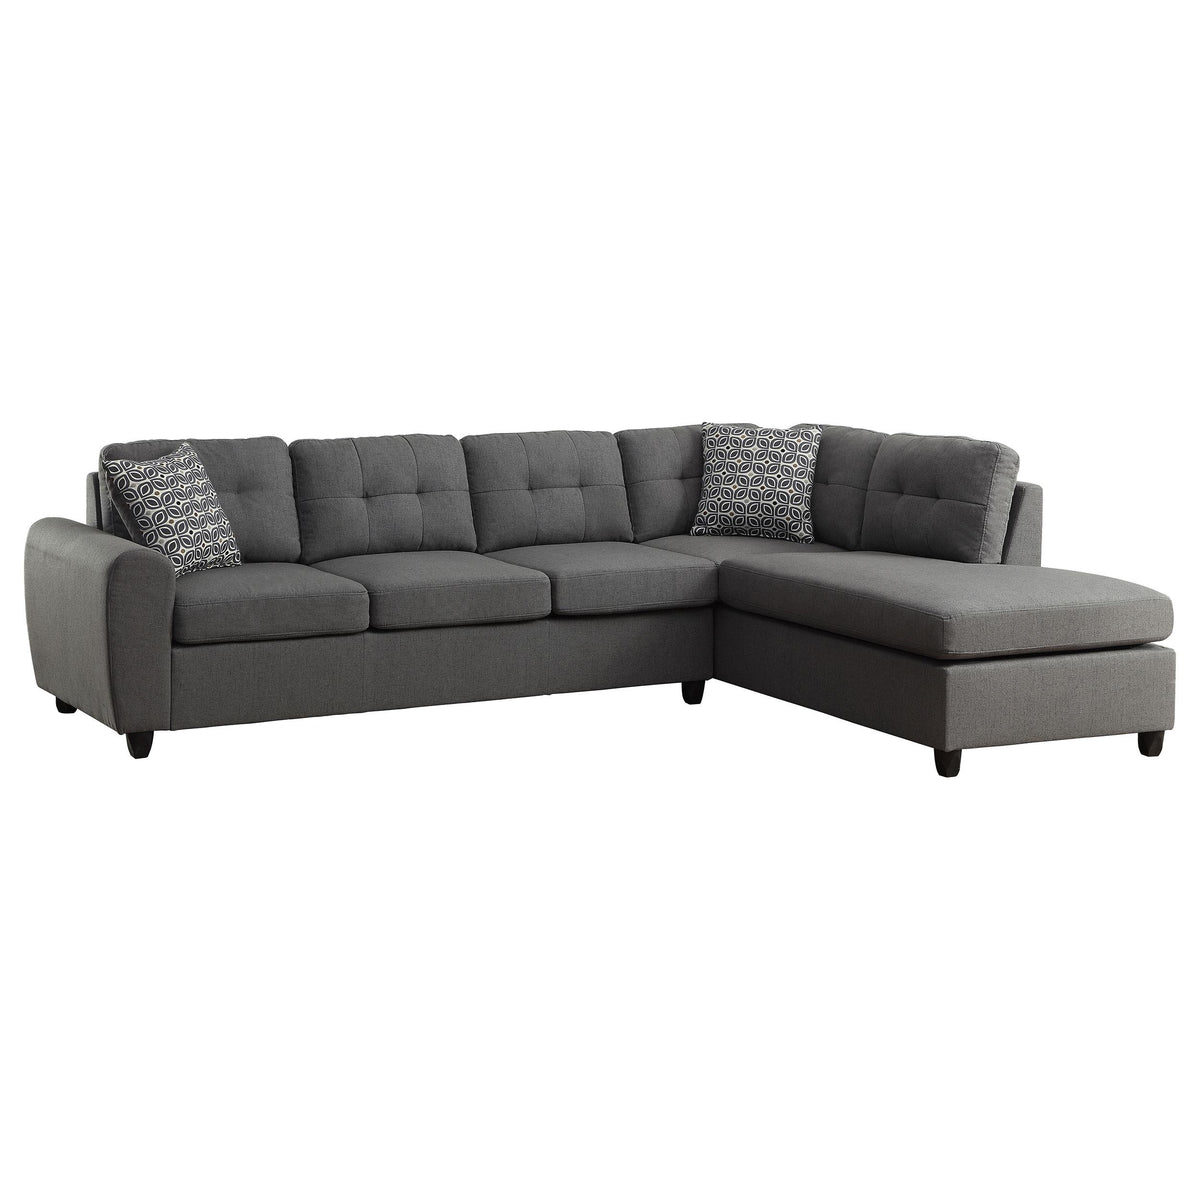 Stonenesse Tufted Sectional Grey  Las Vegas Furniture Stores